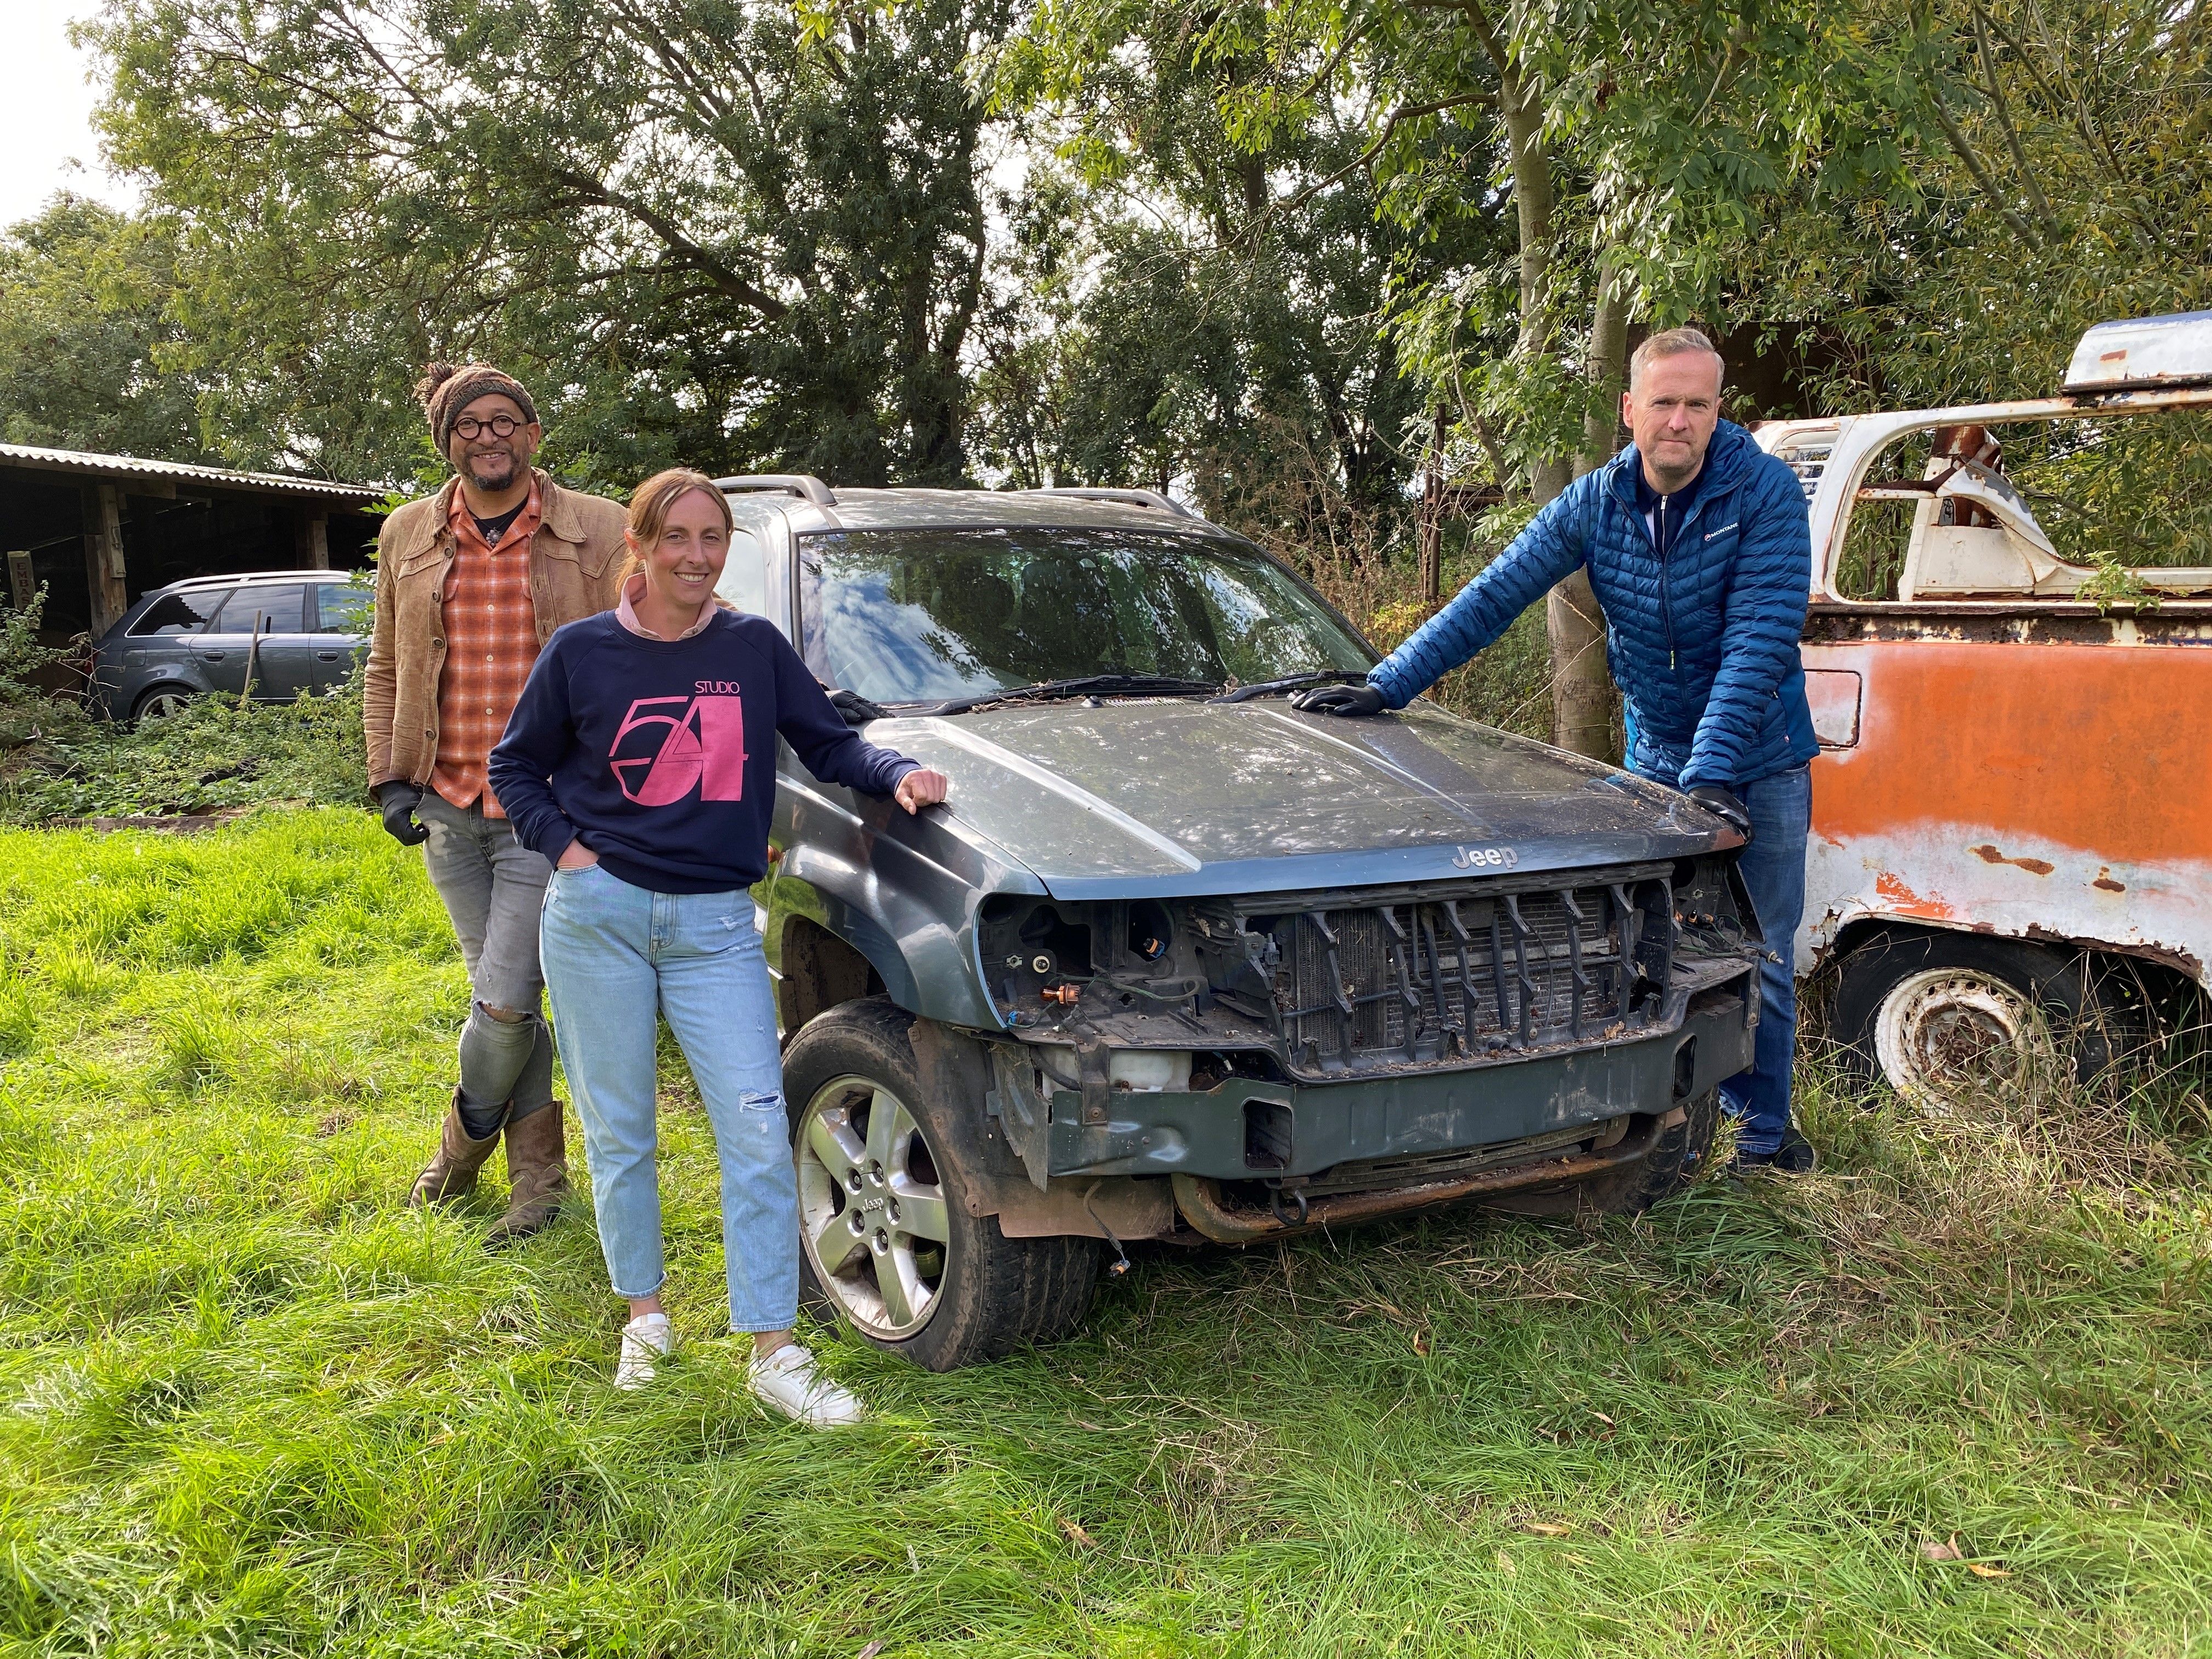 Stephan had bought himself a used Jeep Grand Cherokee, which had the potential to be a contender, but it was off the road due to persistent mechanical problems.